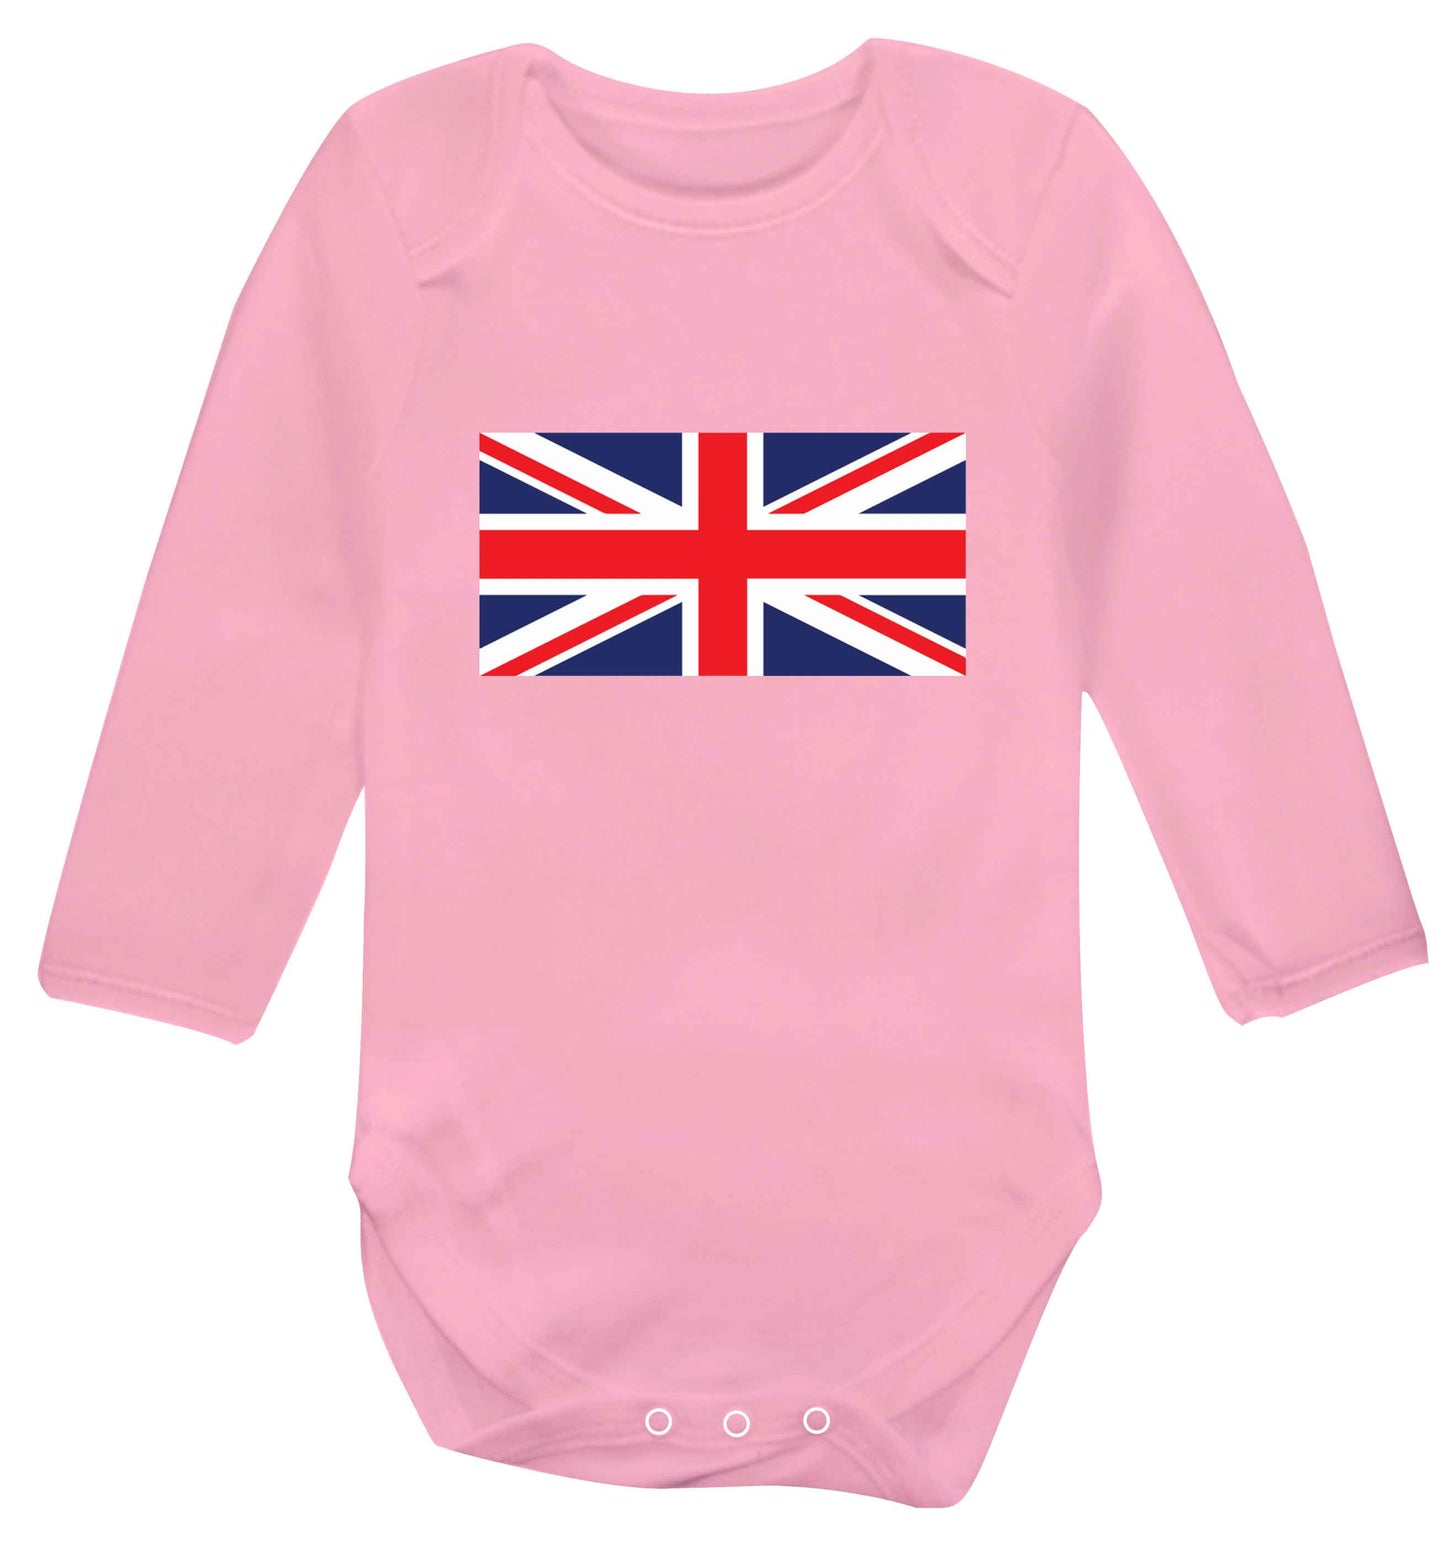 Union Jack baby vest long sleeved pale pink 6-12 months